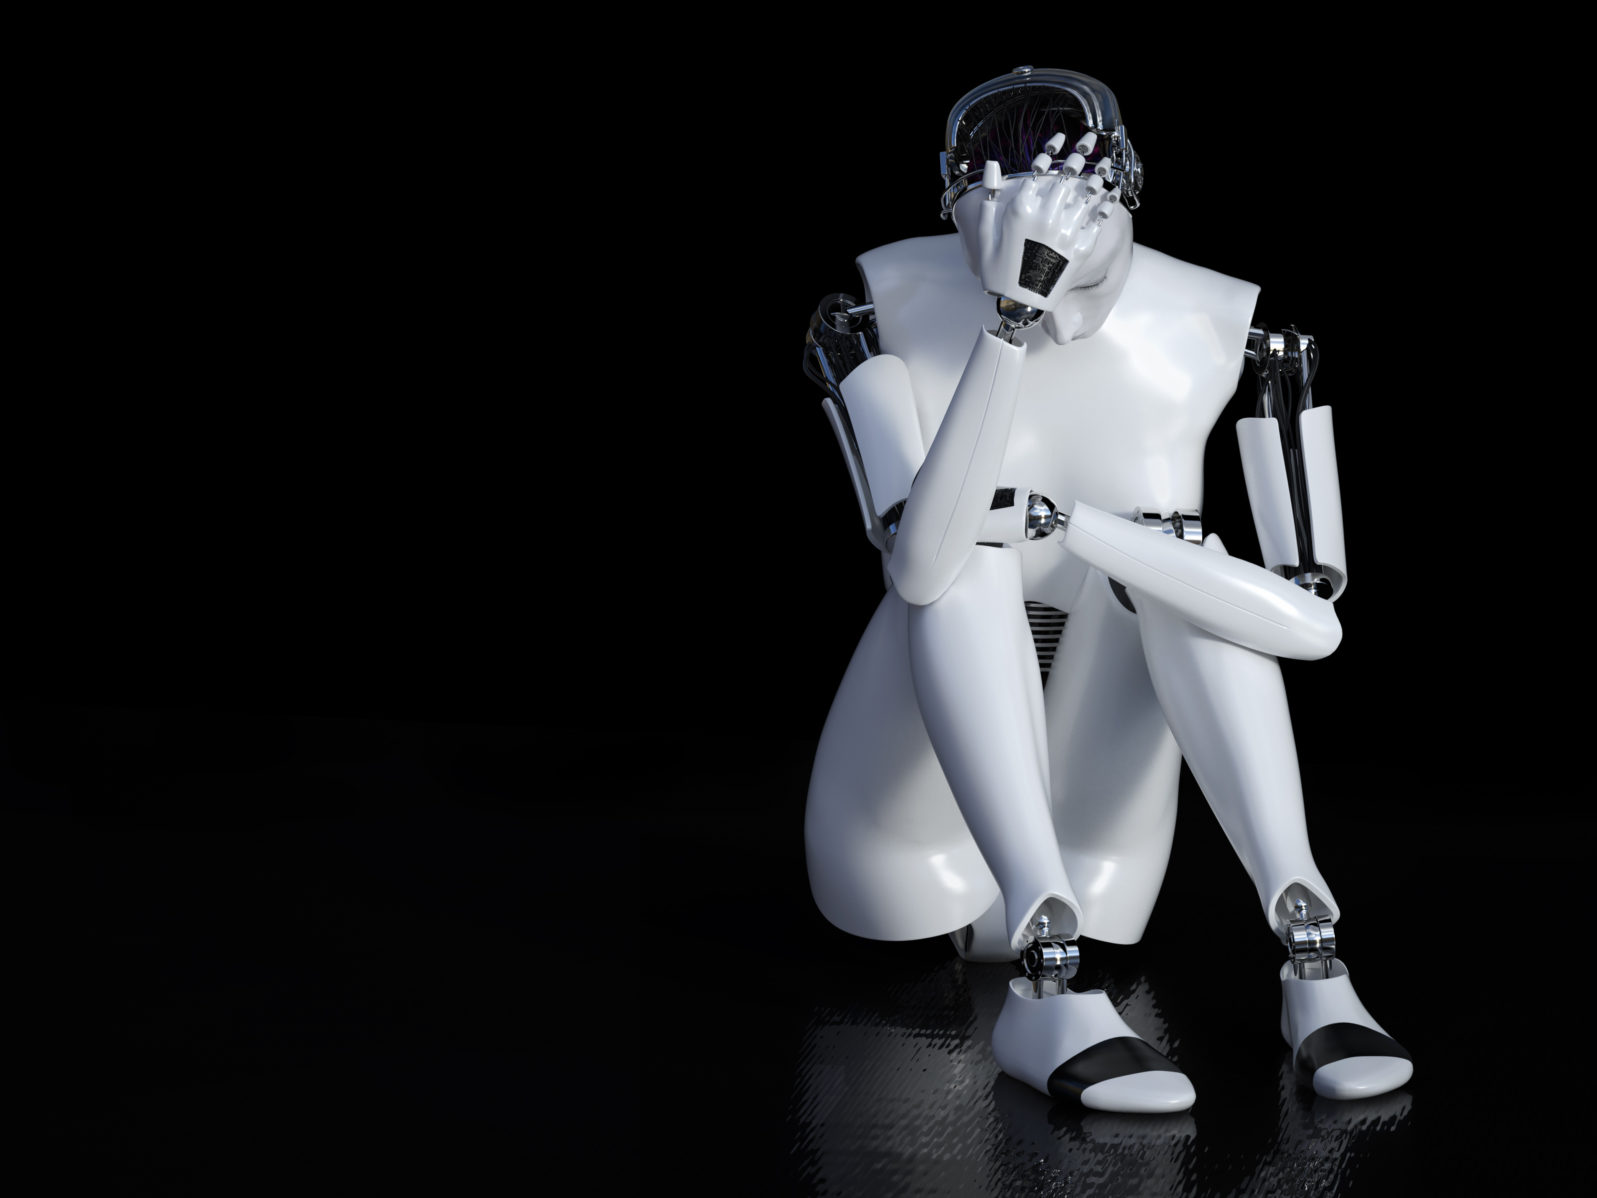 3D rendering of a female robot looking sad.